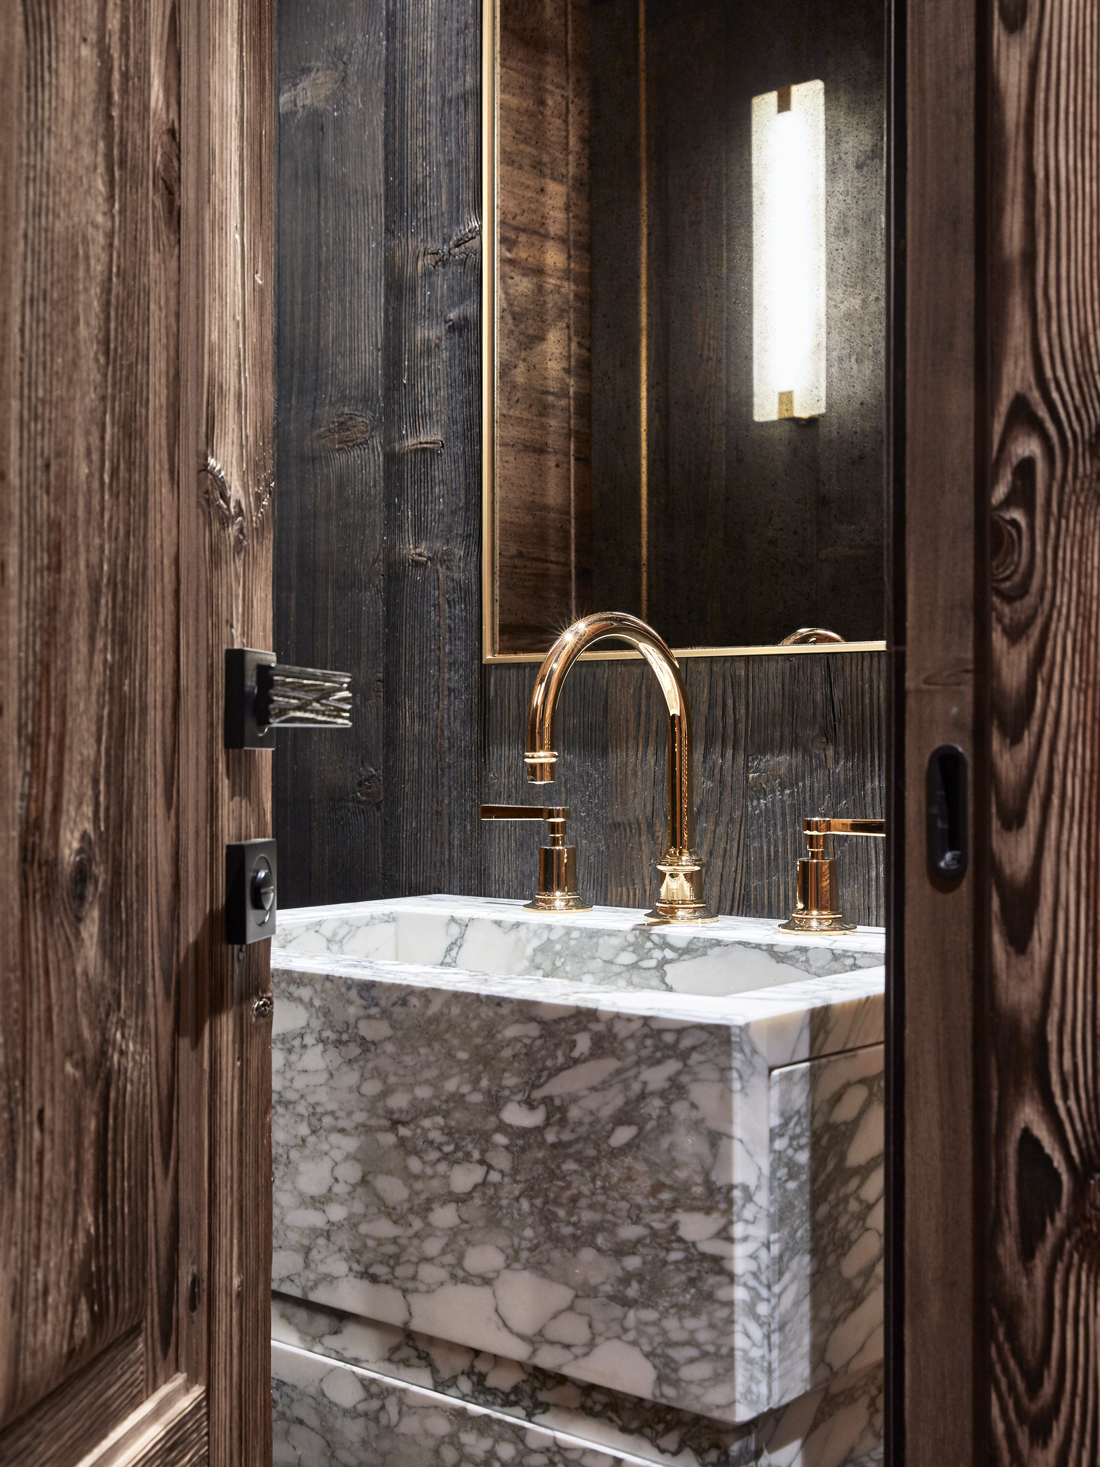 Rustic Wood & Marble Bathroom | DPAGES